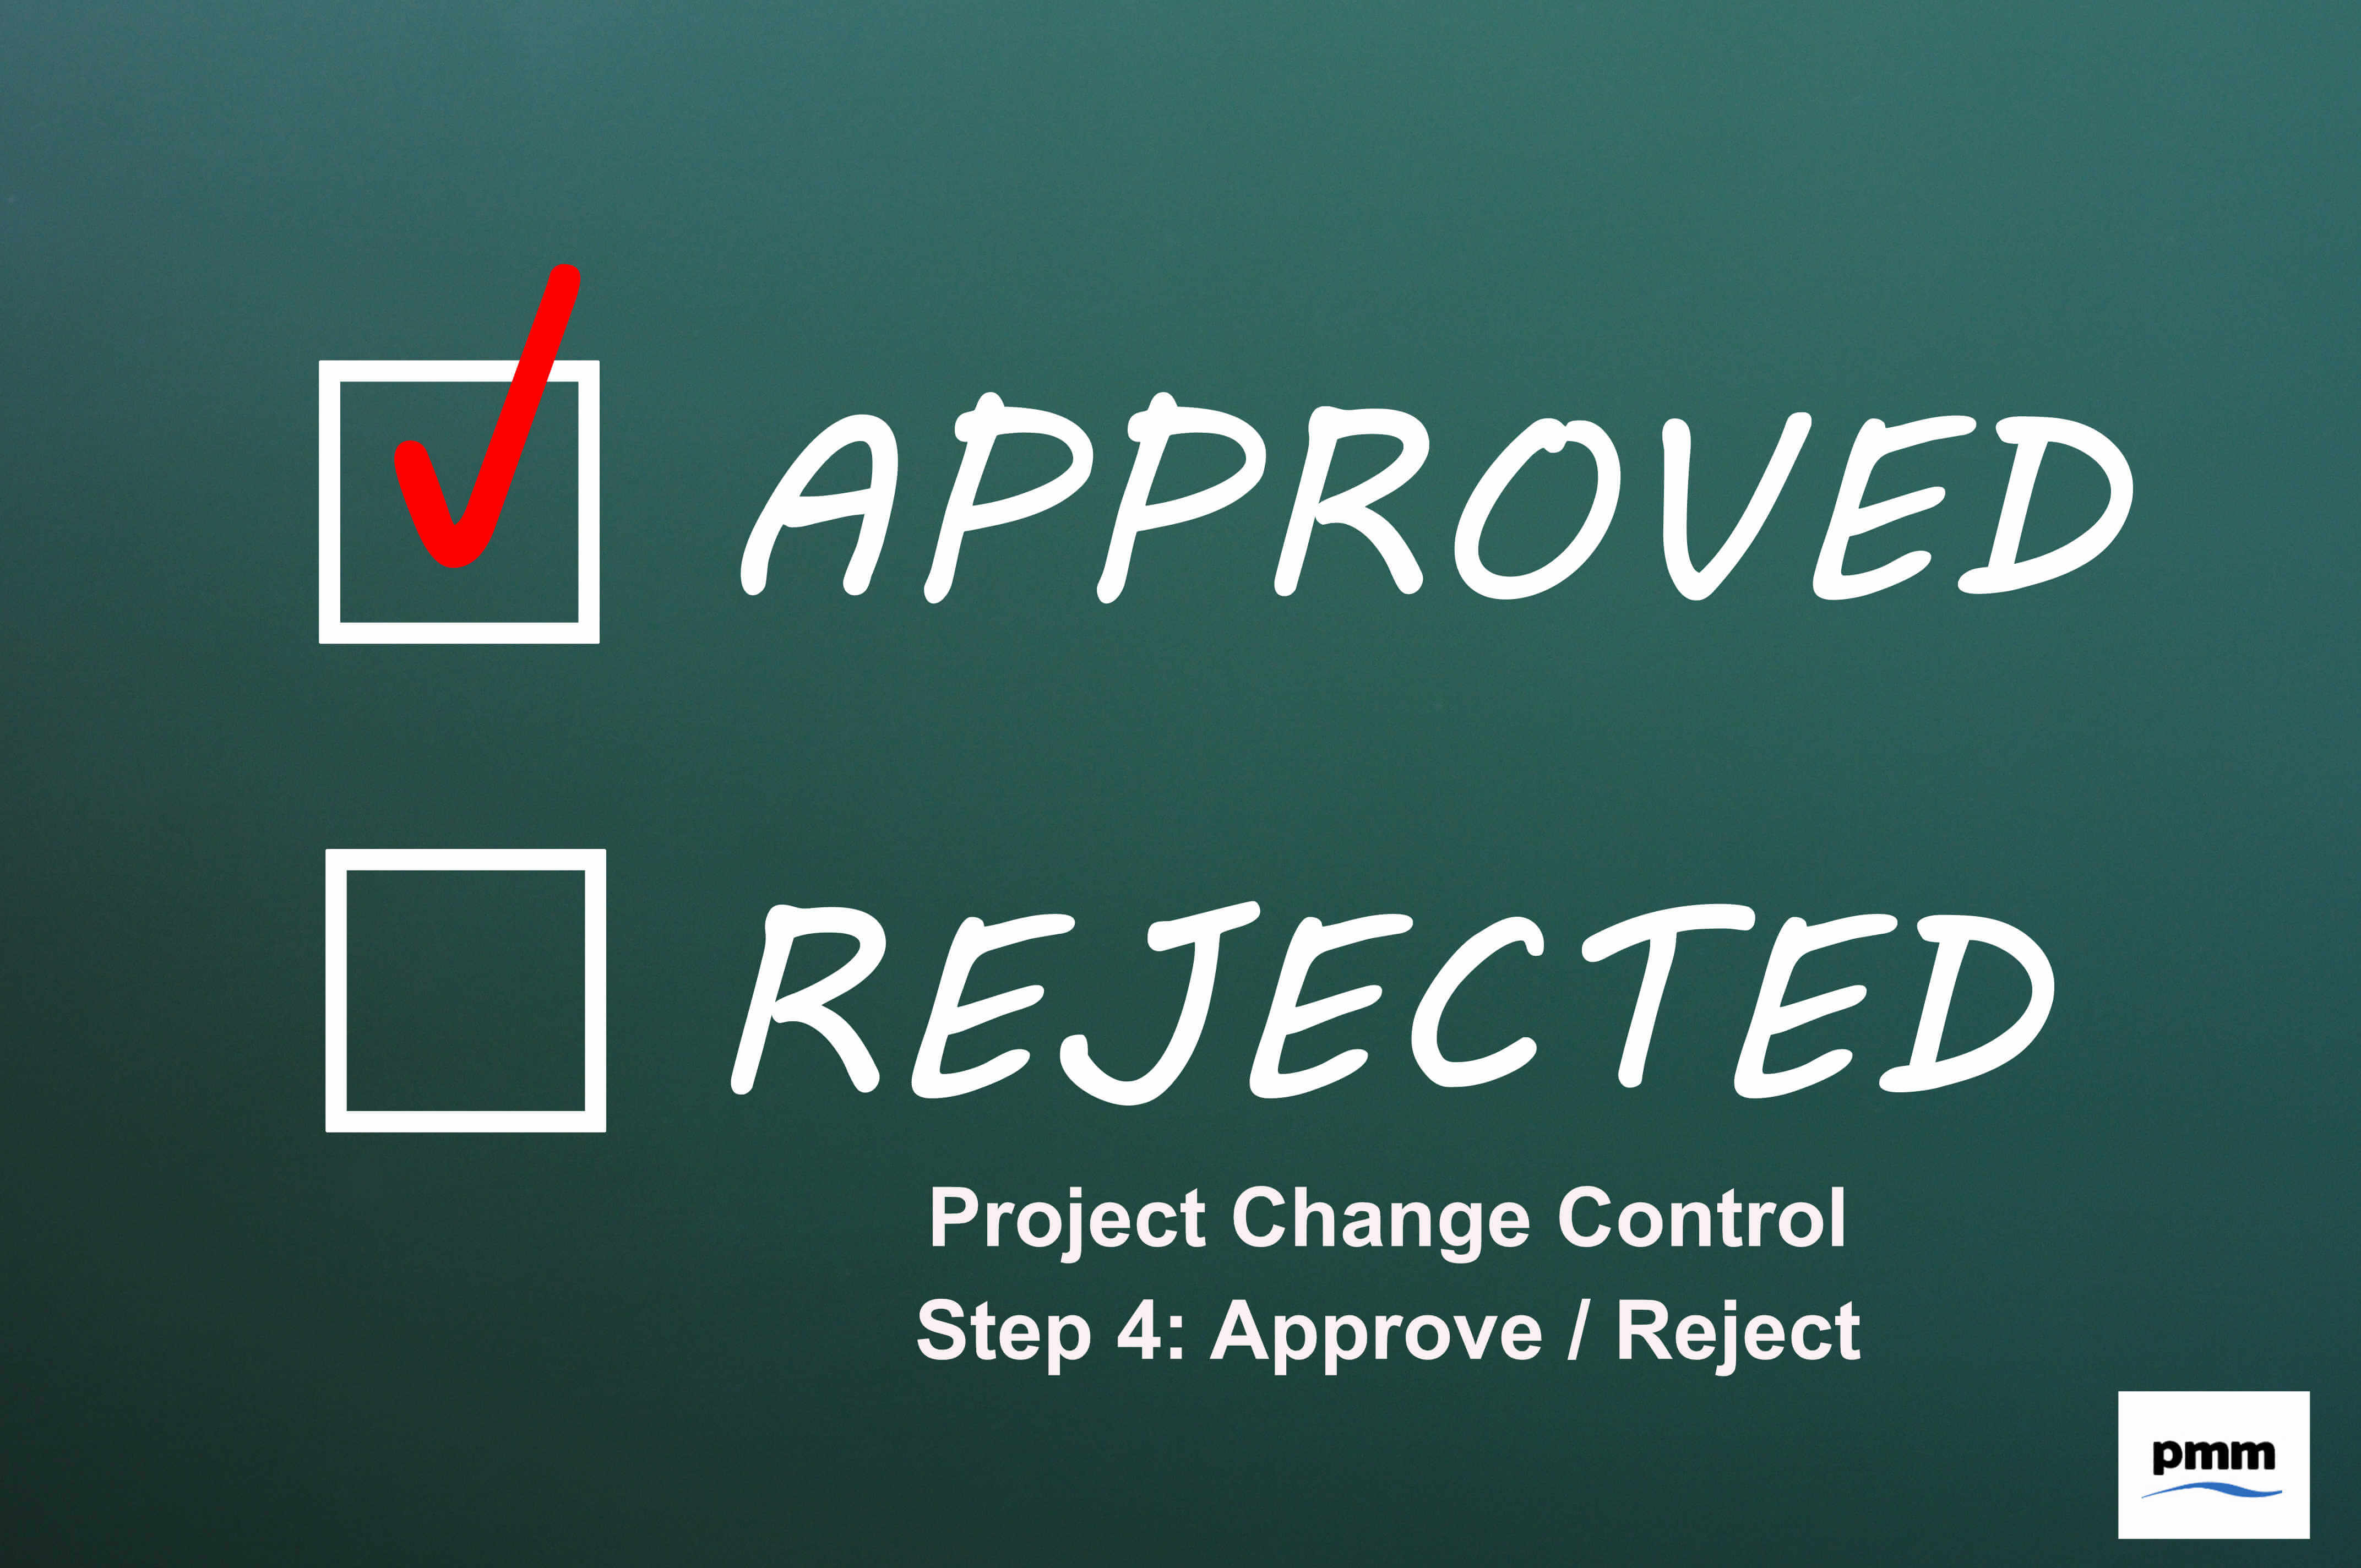 Approval / Rejection process of project change requests